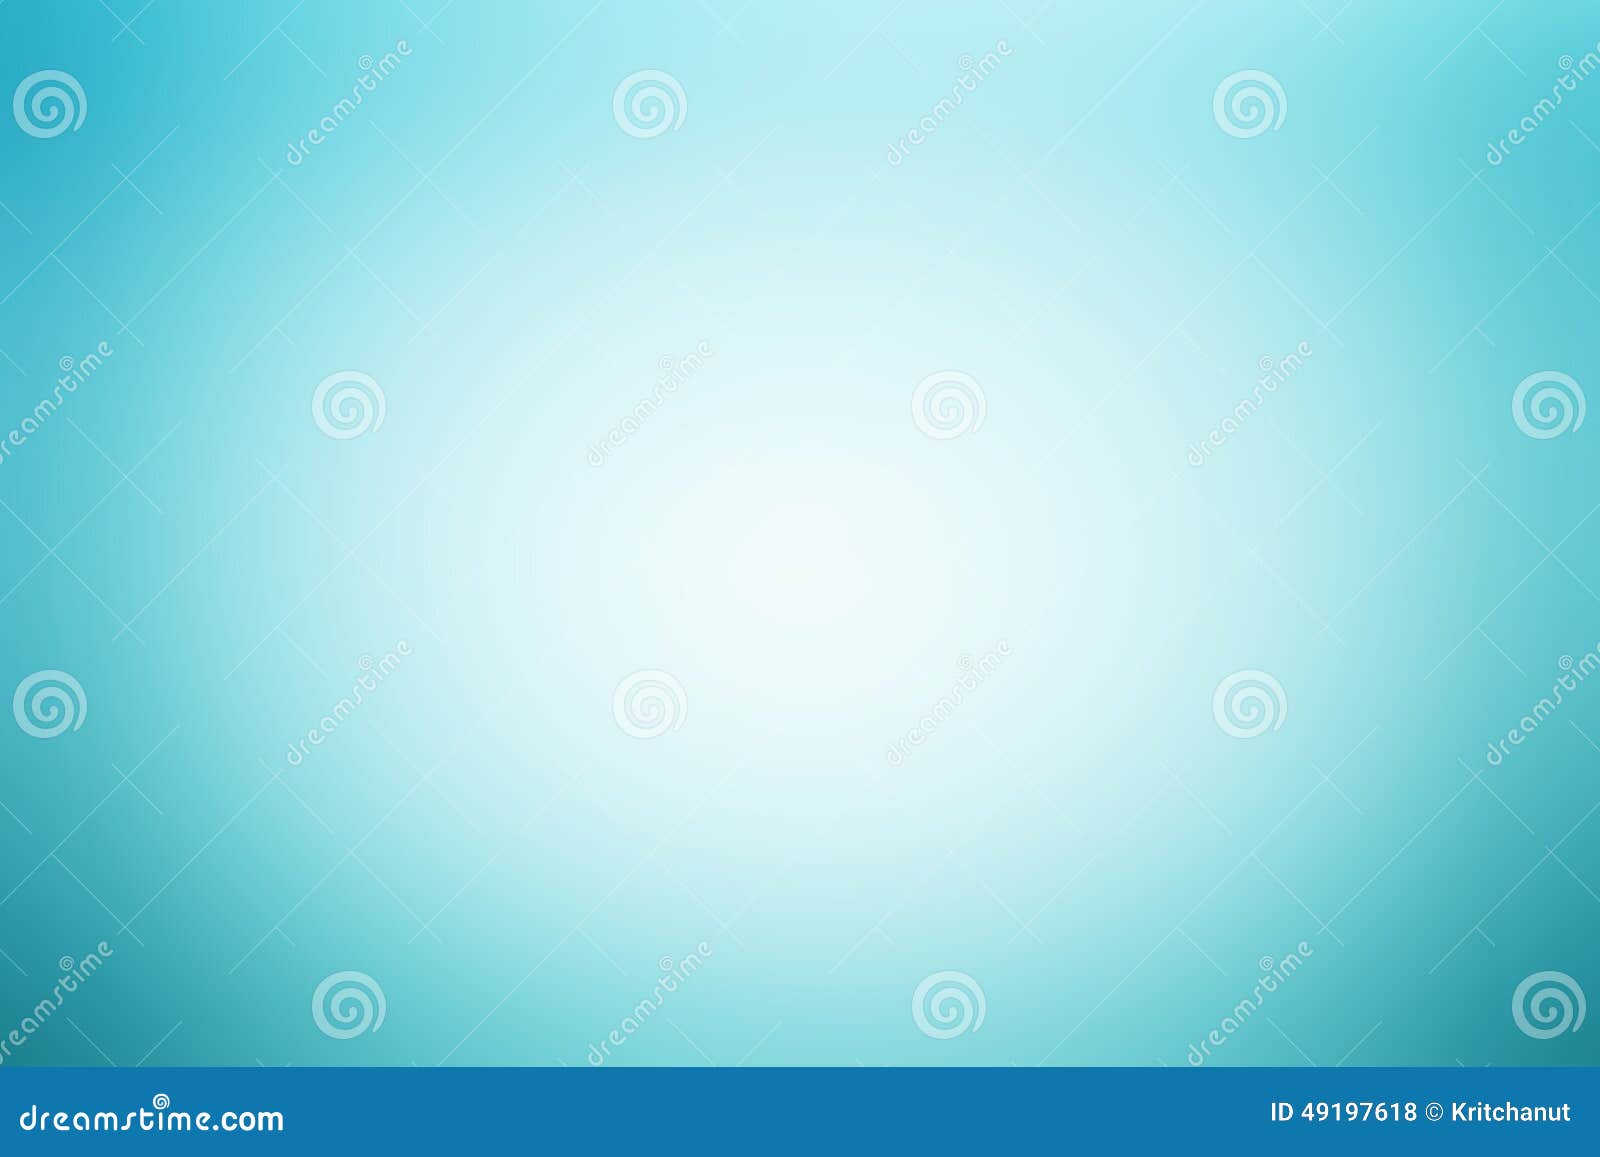 light blue abstract background with radial gradient effect